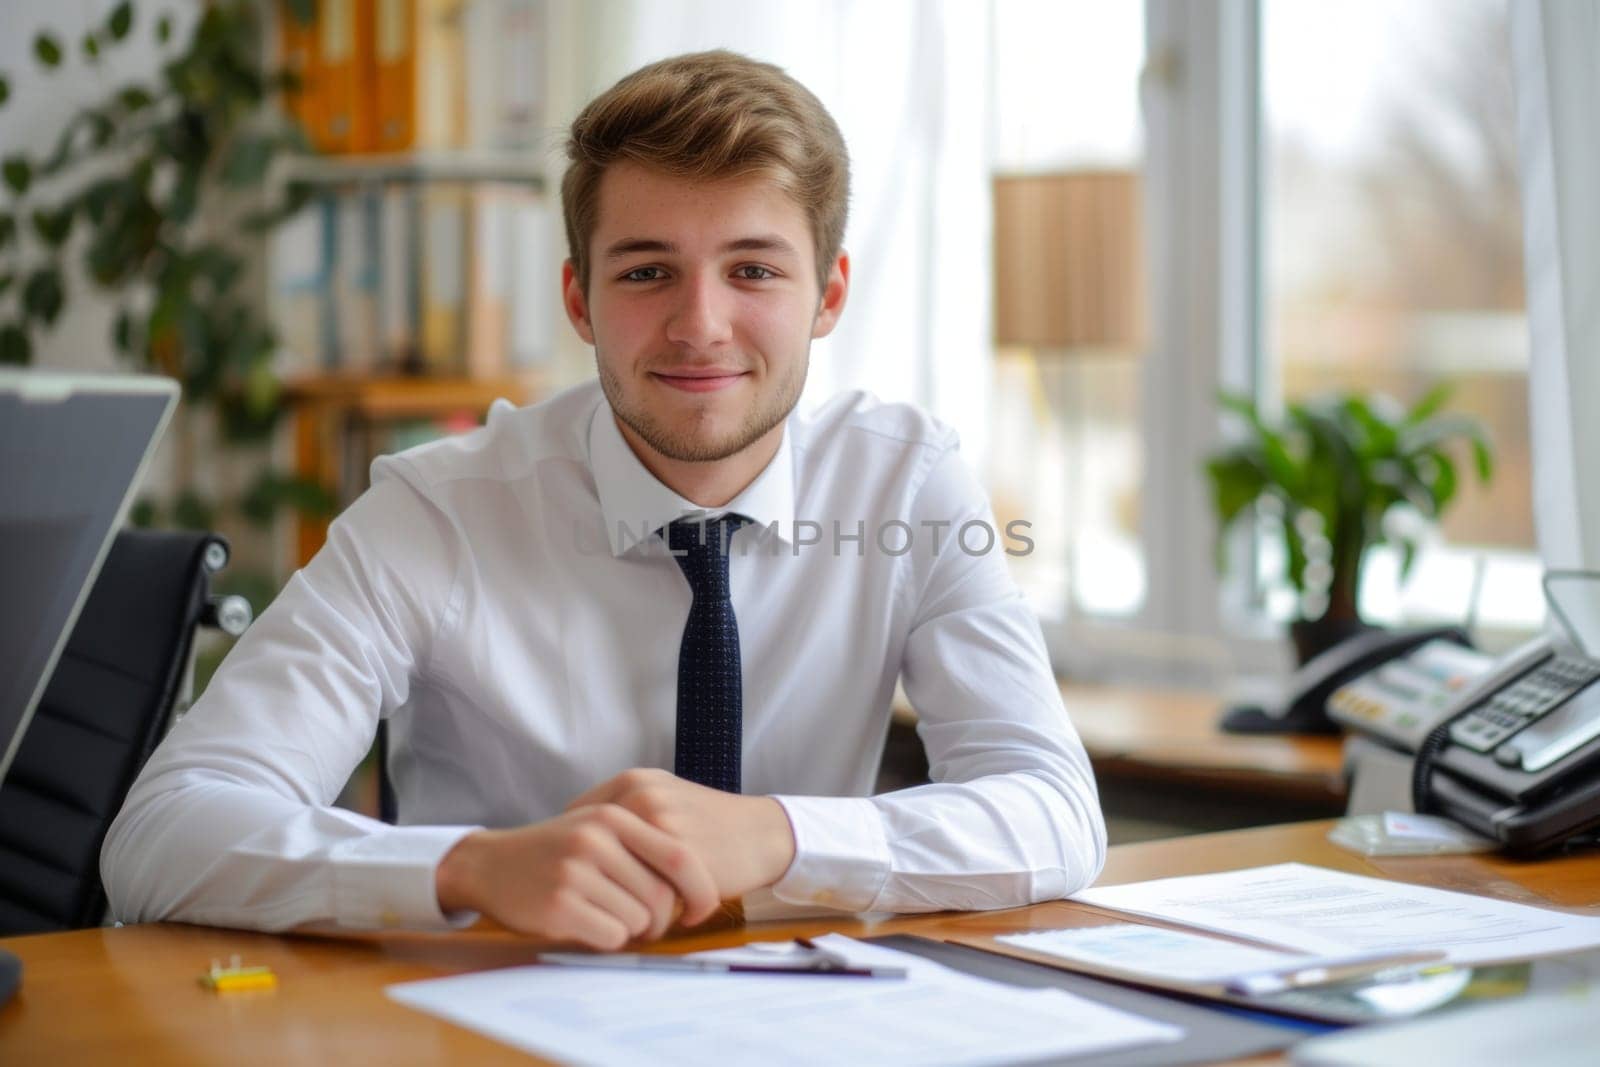 A young businessman in well dress sitting at desk in his office room.